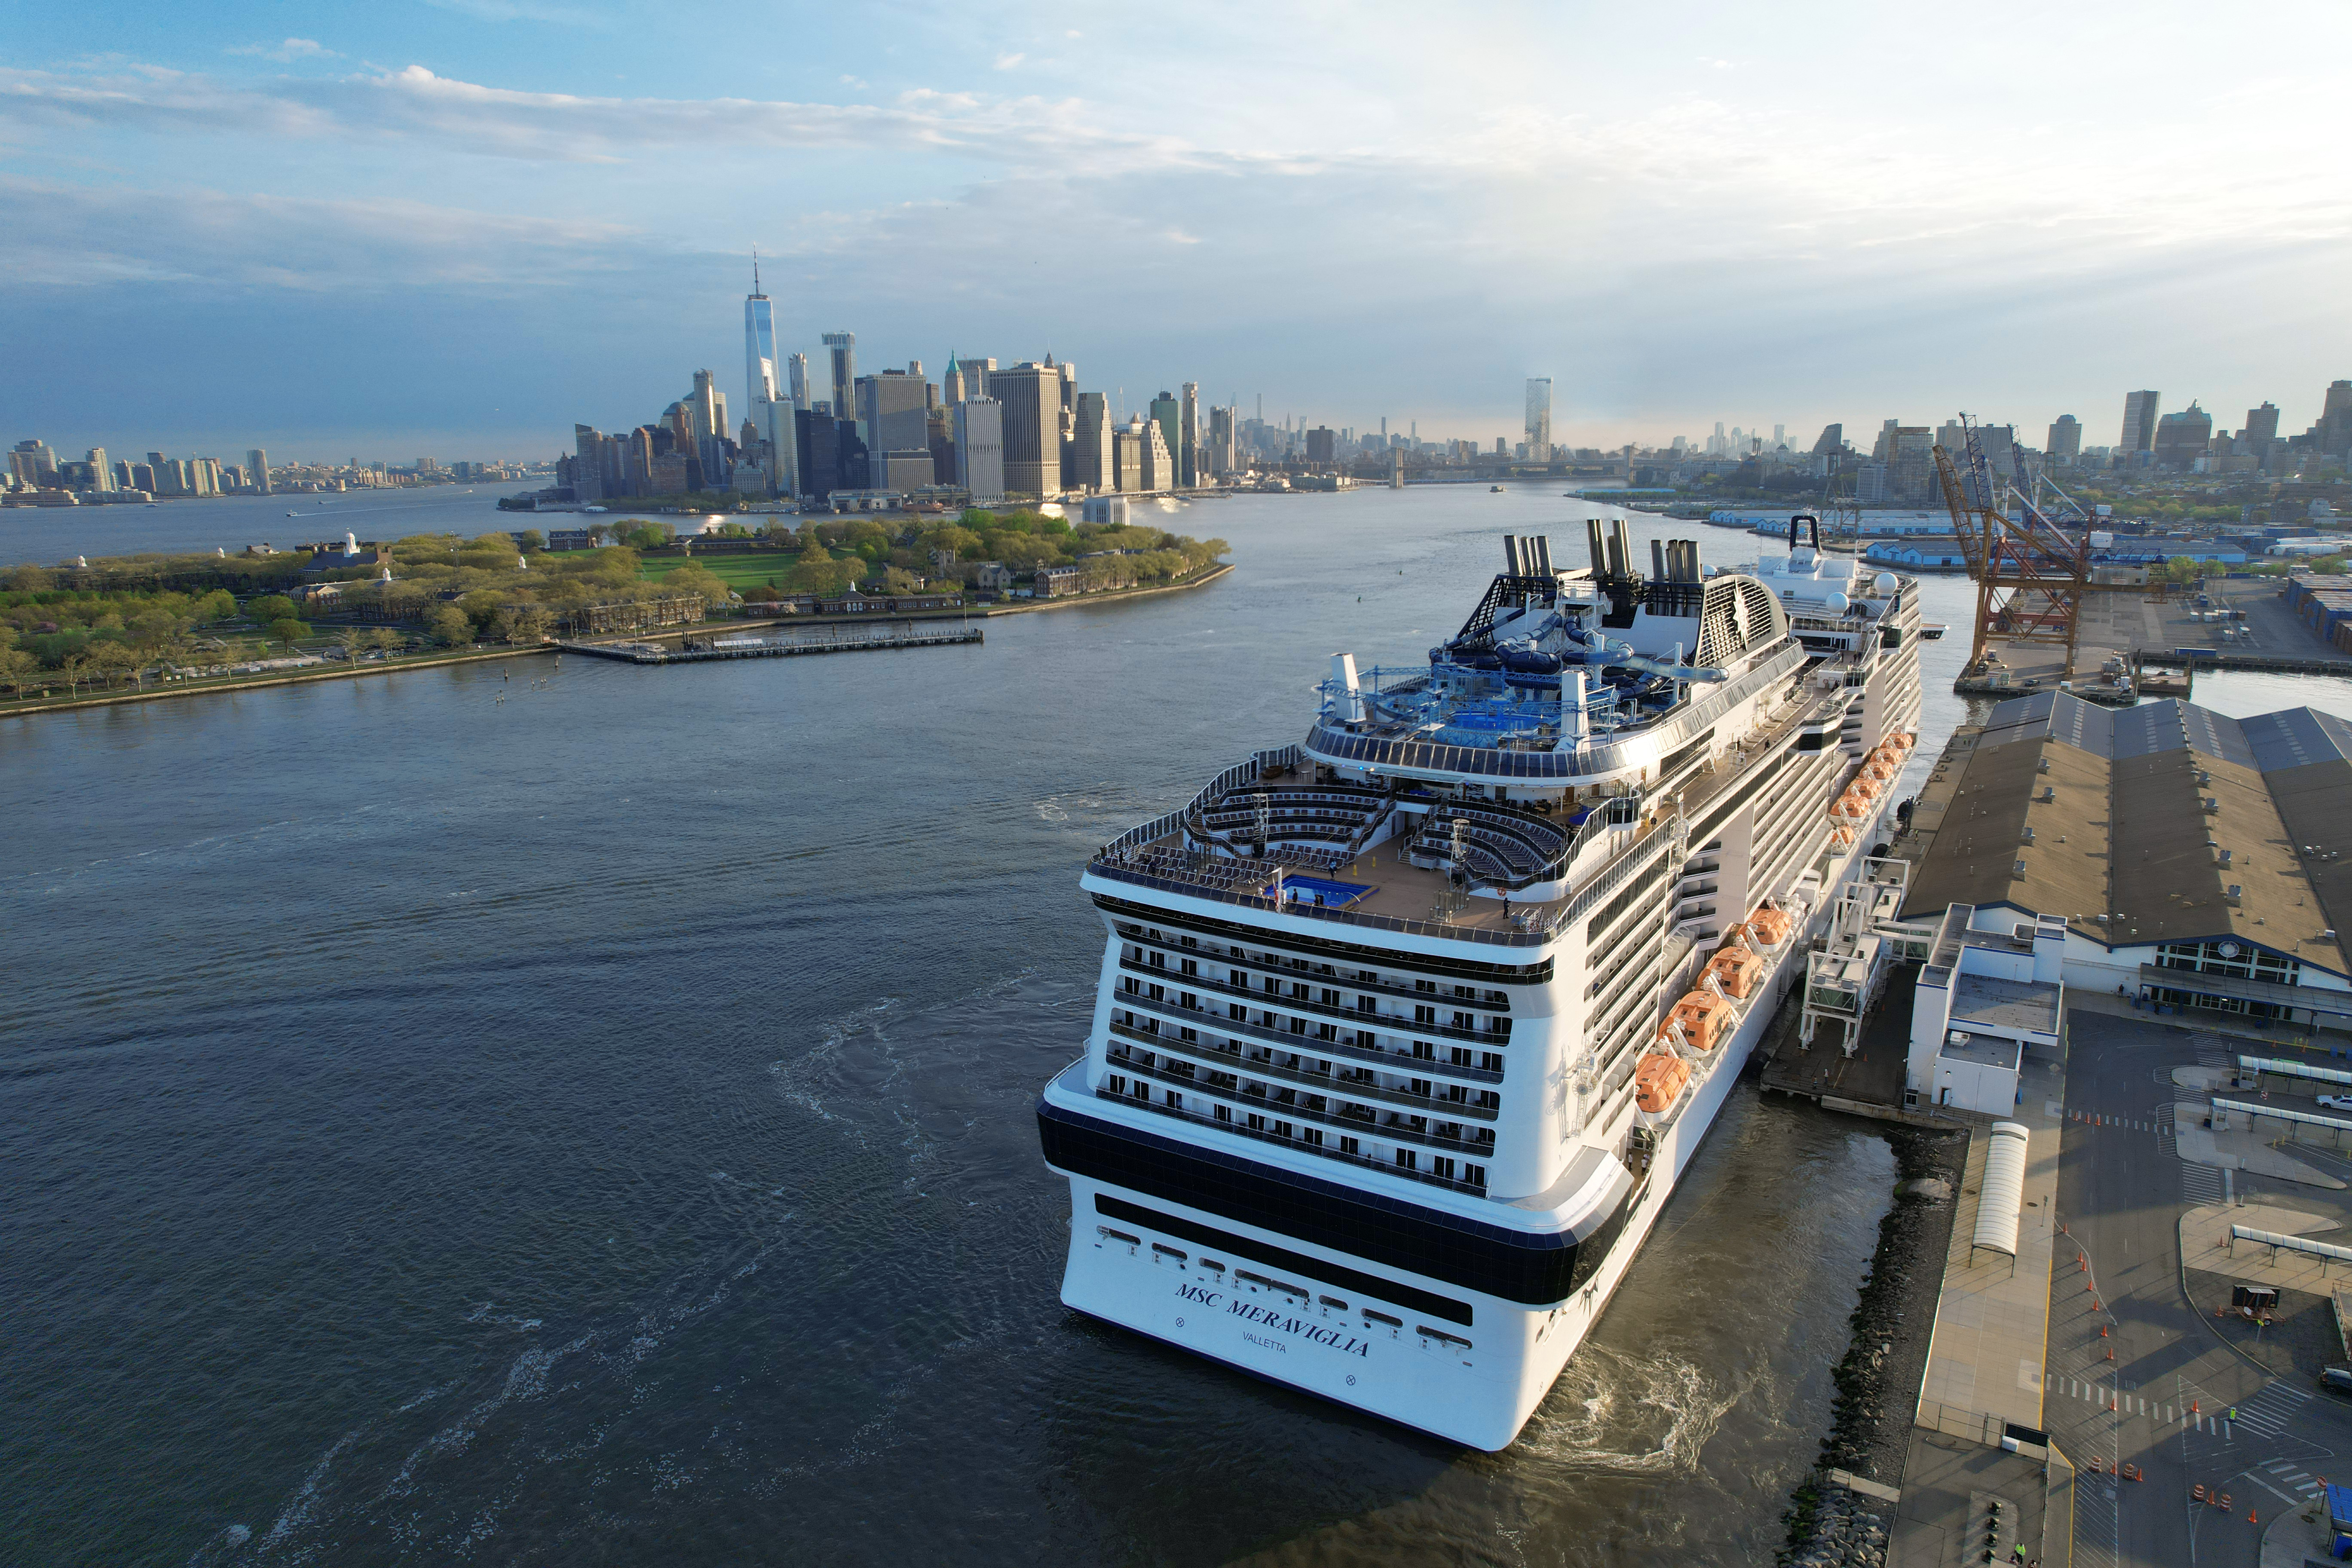 MSC Meraviglia Arrives In New York City Offering Year Round Sailings to The Bahamas and Florida, Canada and New England, and Bermuda (Image at LateCruiseNews.com - April 2023)